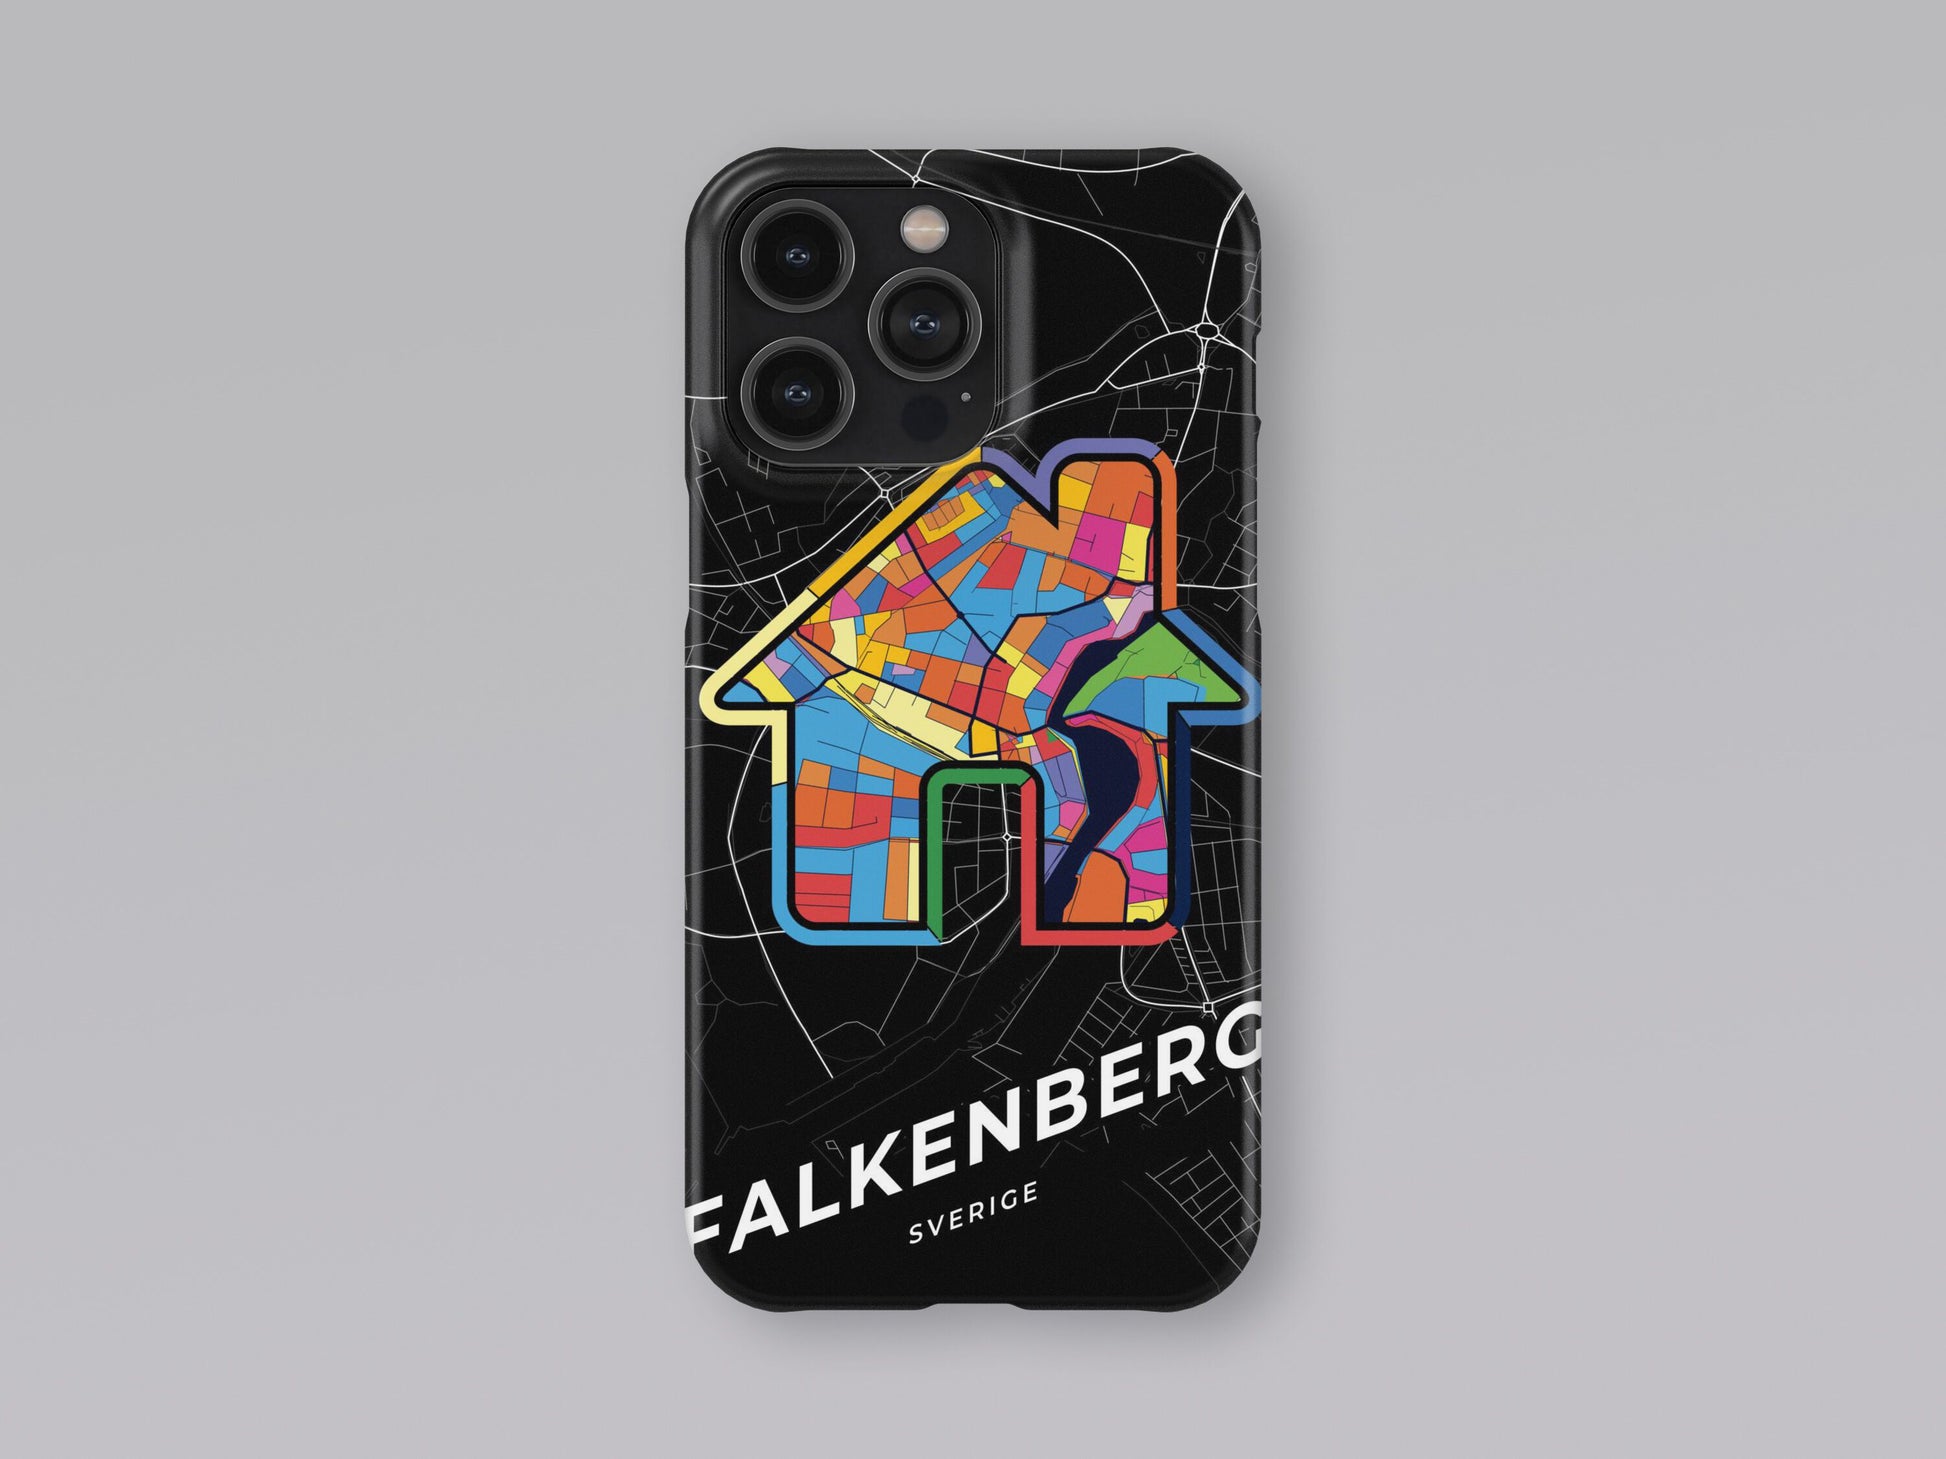 Falkenberg Sweden slim phone case with colorful icon. Birthday, wedding or housewarming gift. Couple match cases. 3